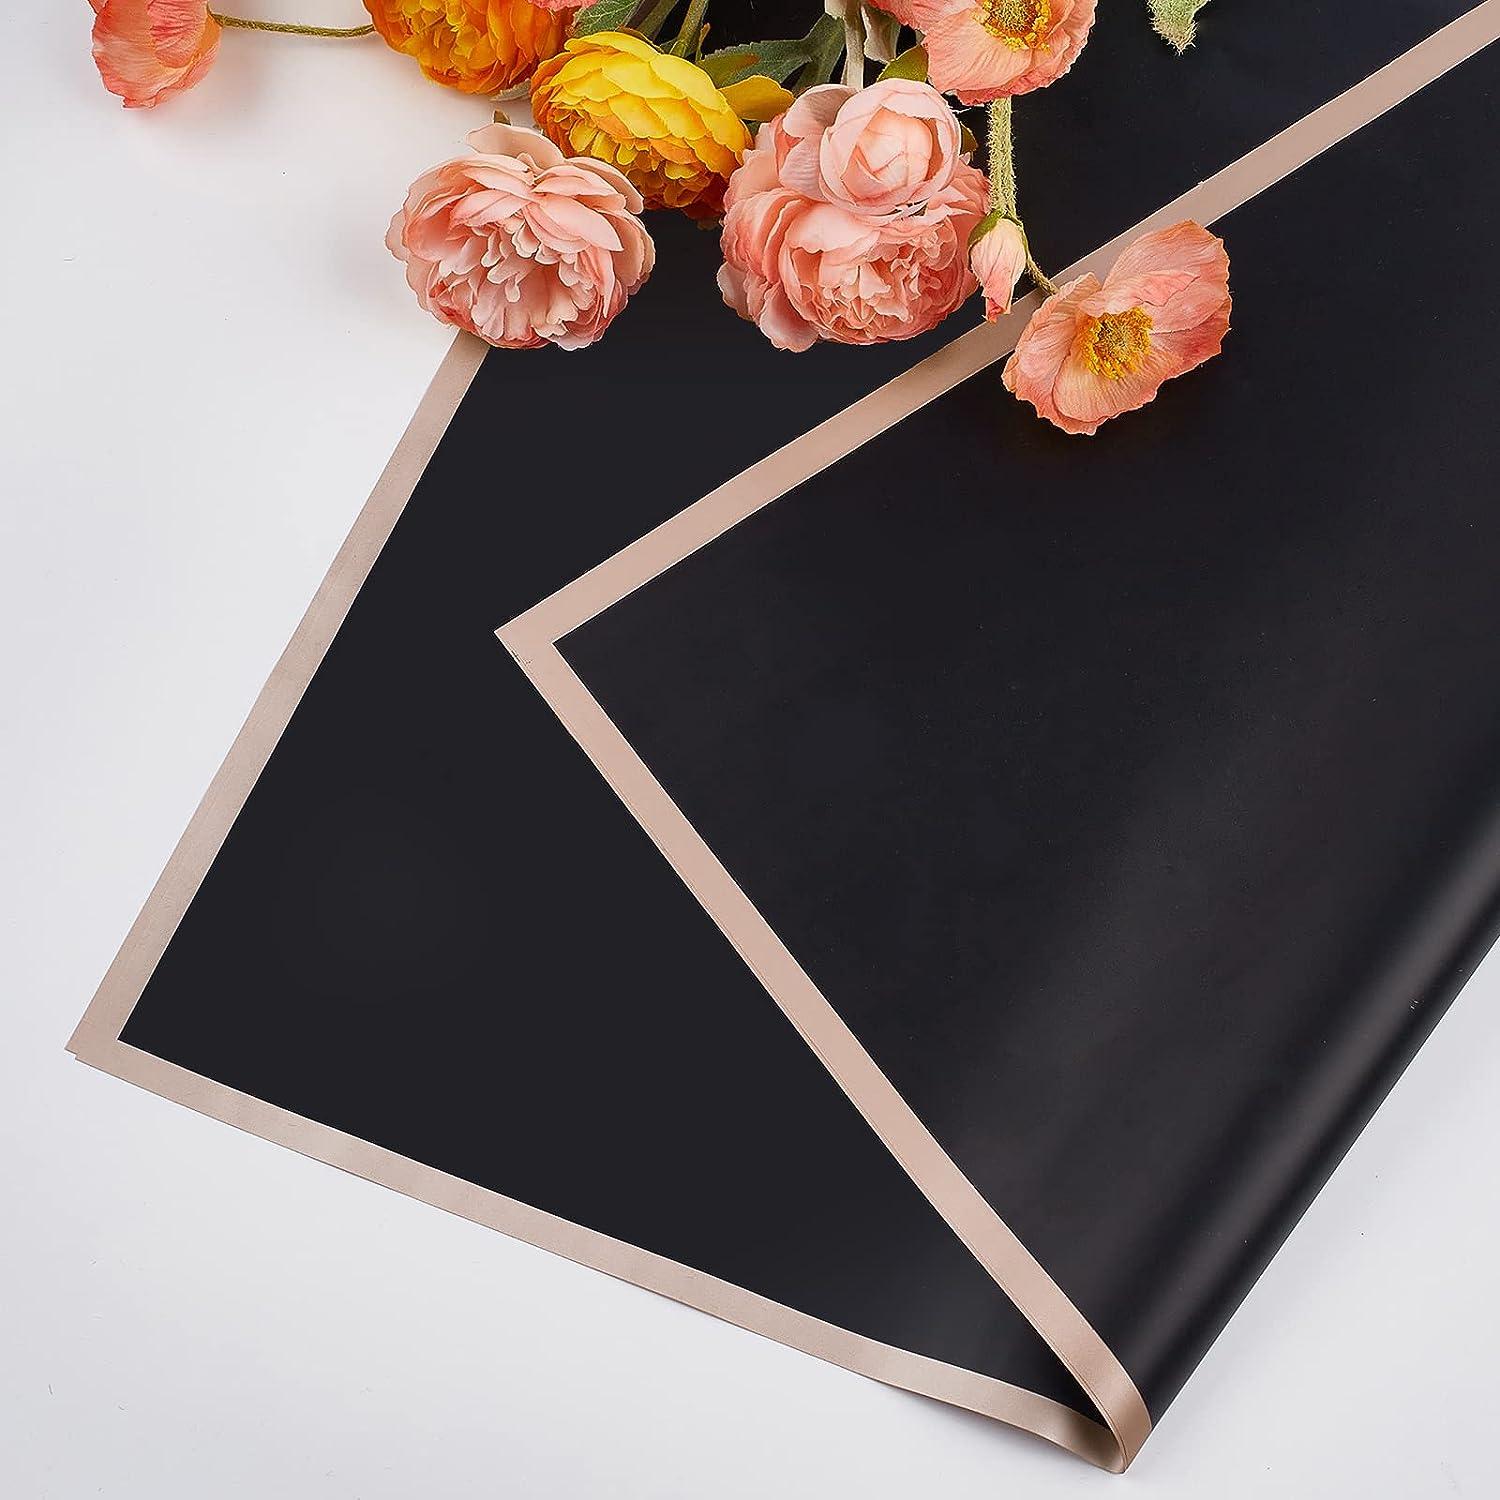 Jutieuo 20 Sheets Flower Wrapping Paper Florist Bouquet Supplies Waterproof  Floral Wrapping Paper with Ribbon 22.8x22.8 inch (Black)